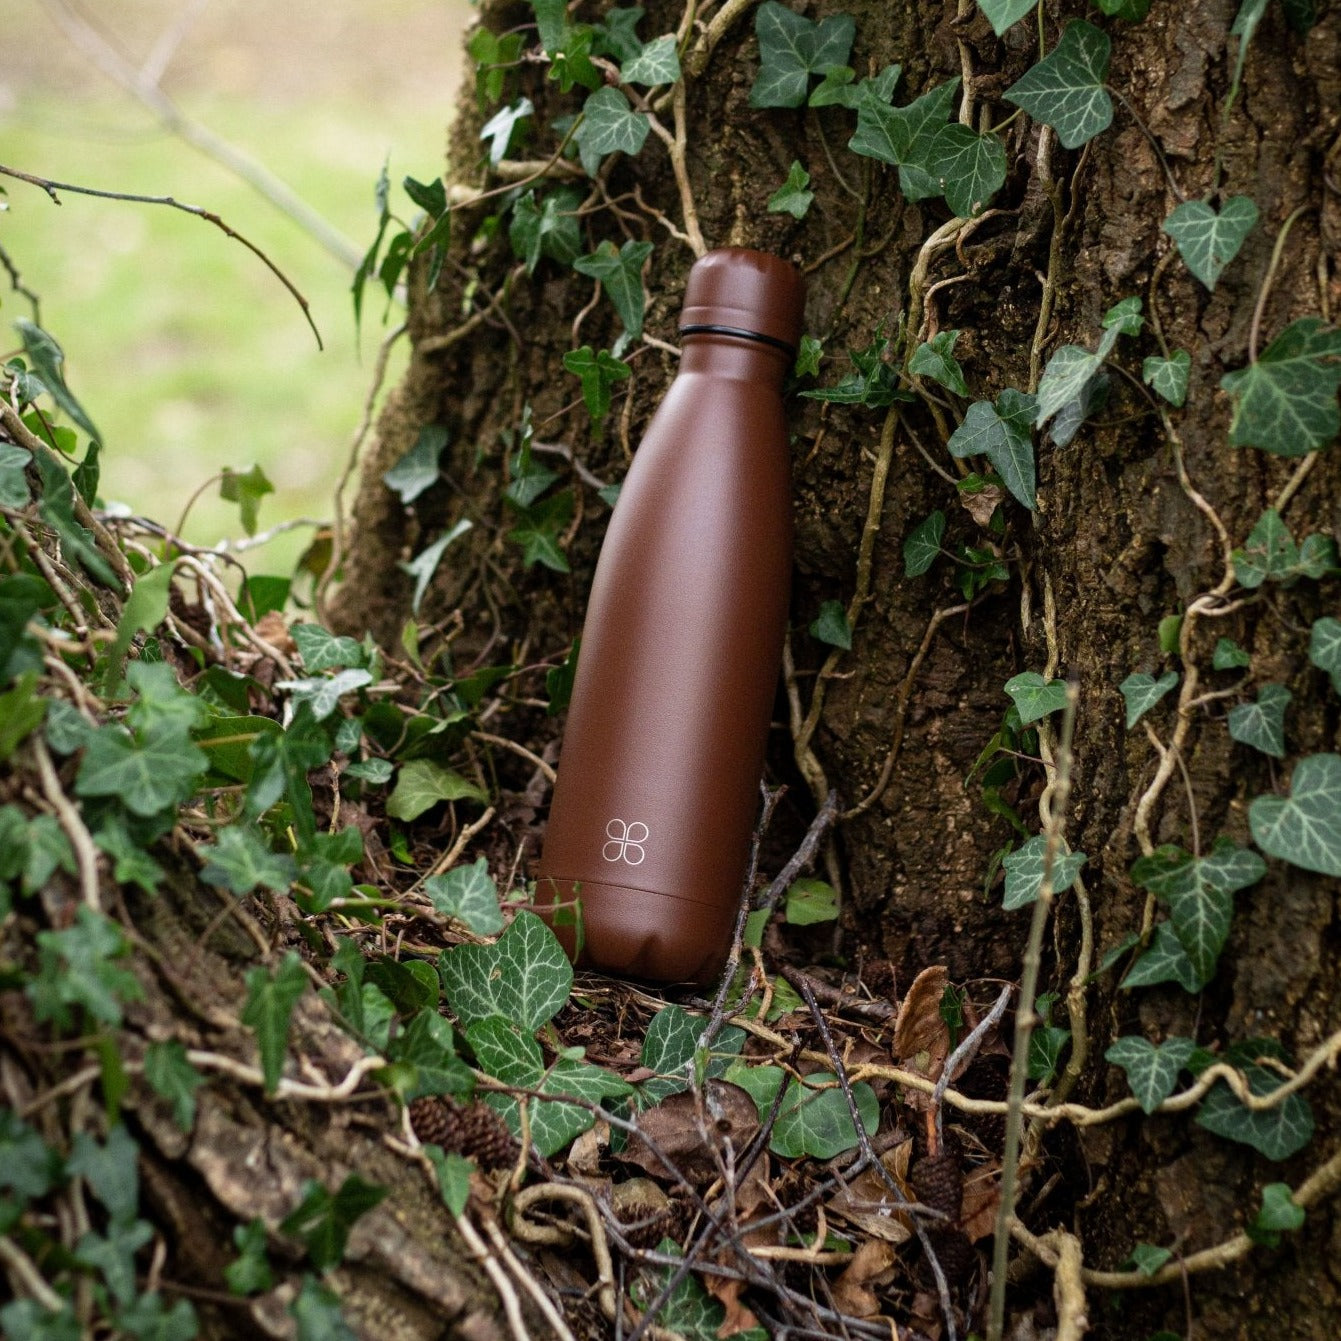 Brown water bottle. Sits on a tree branch with leaves around.